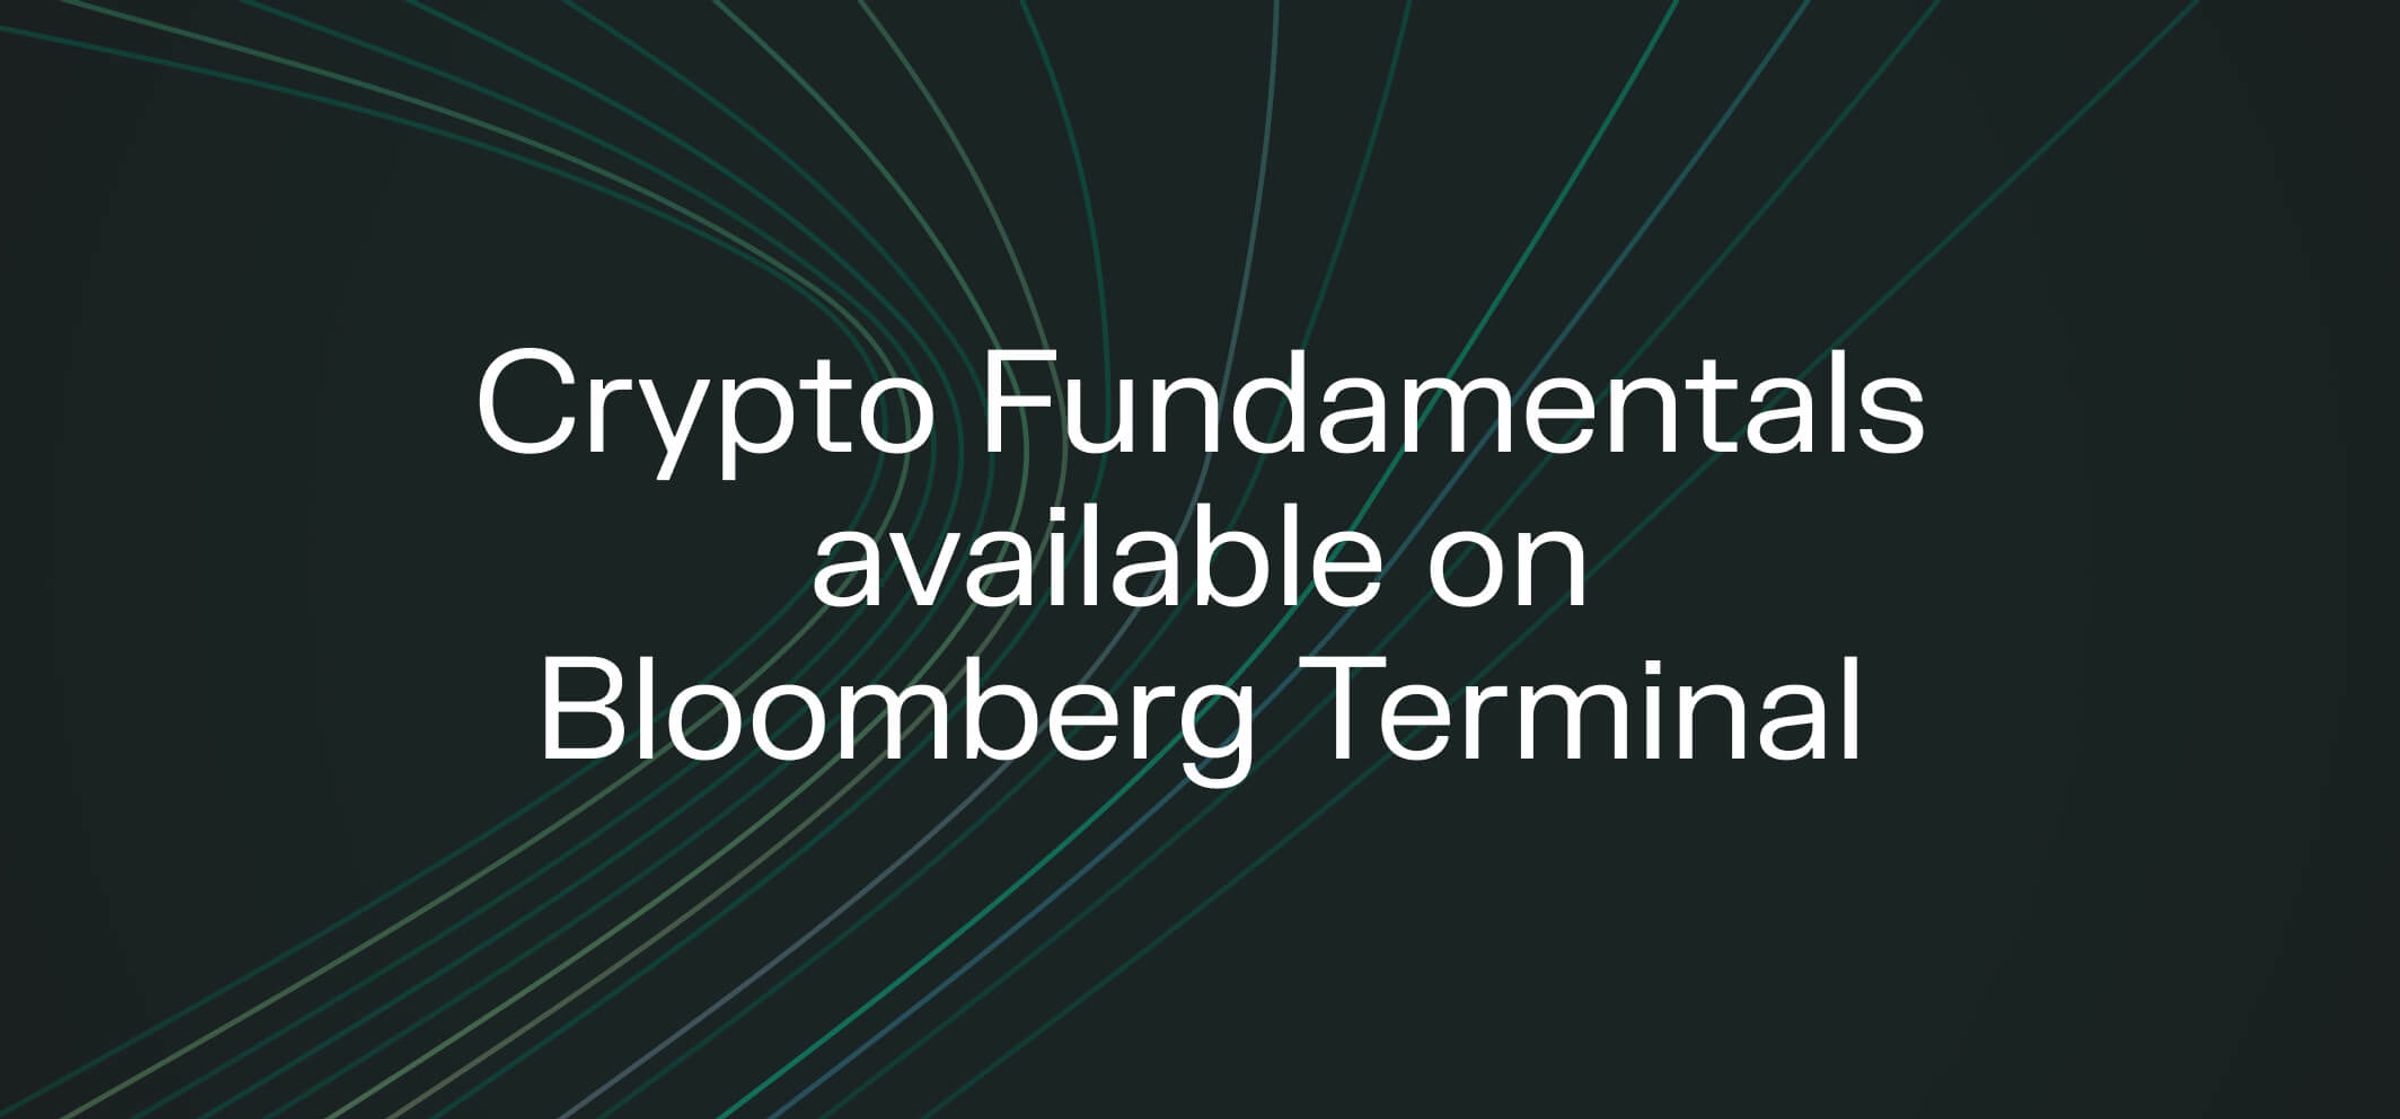 Crypto Fundamentals application launches today on the Bloomberg App Portal